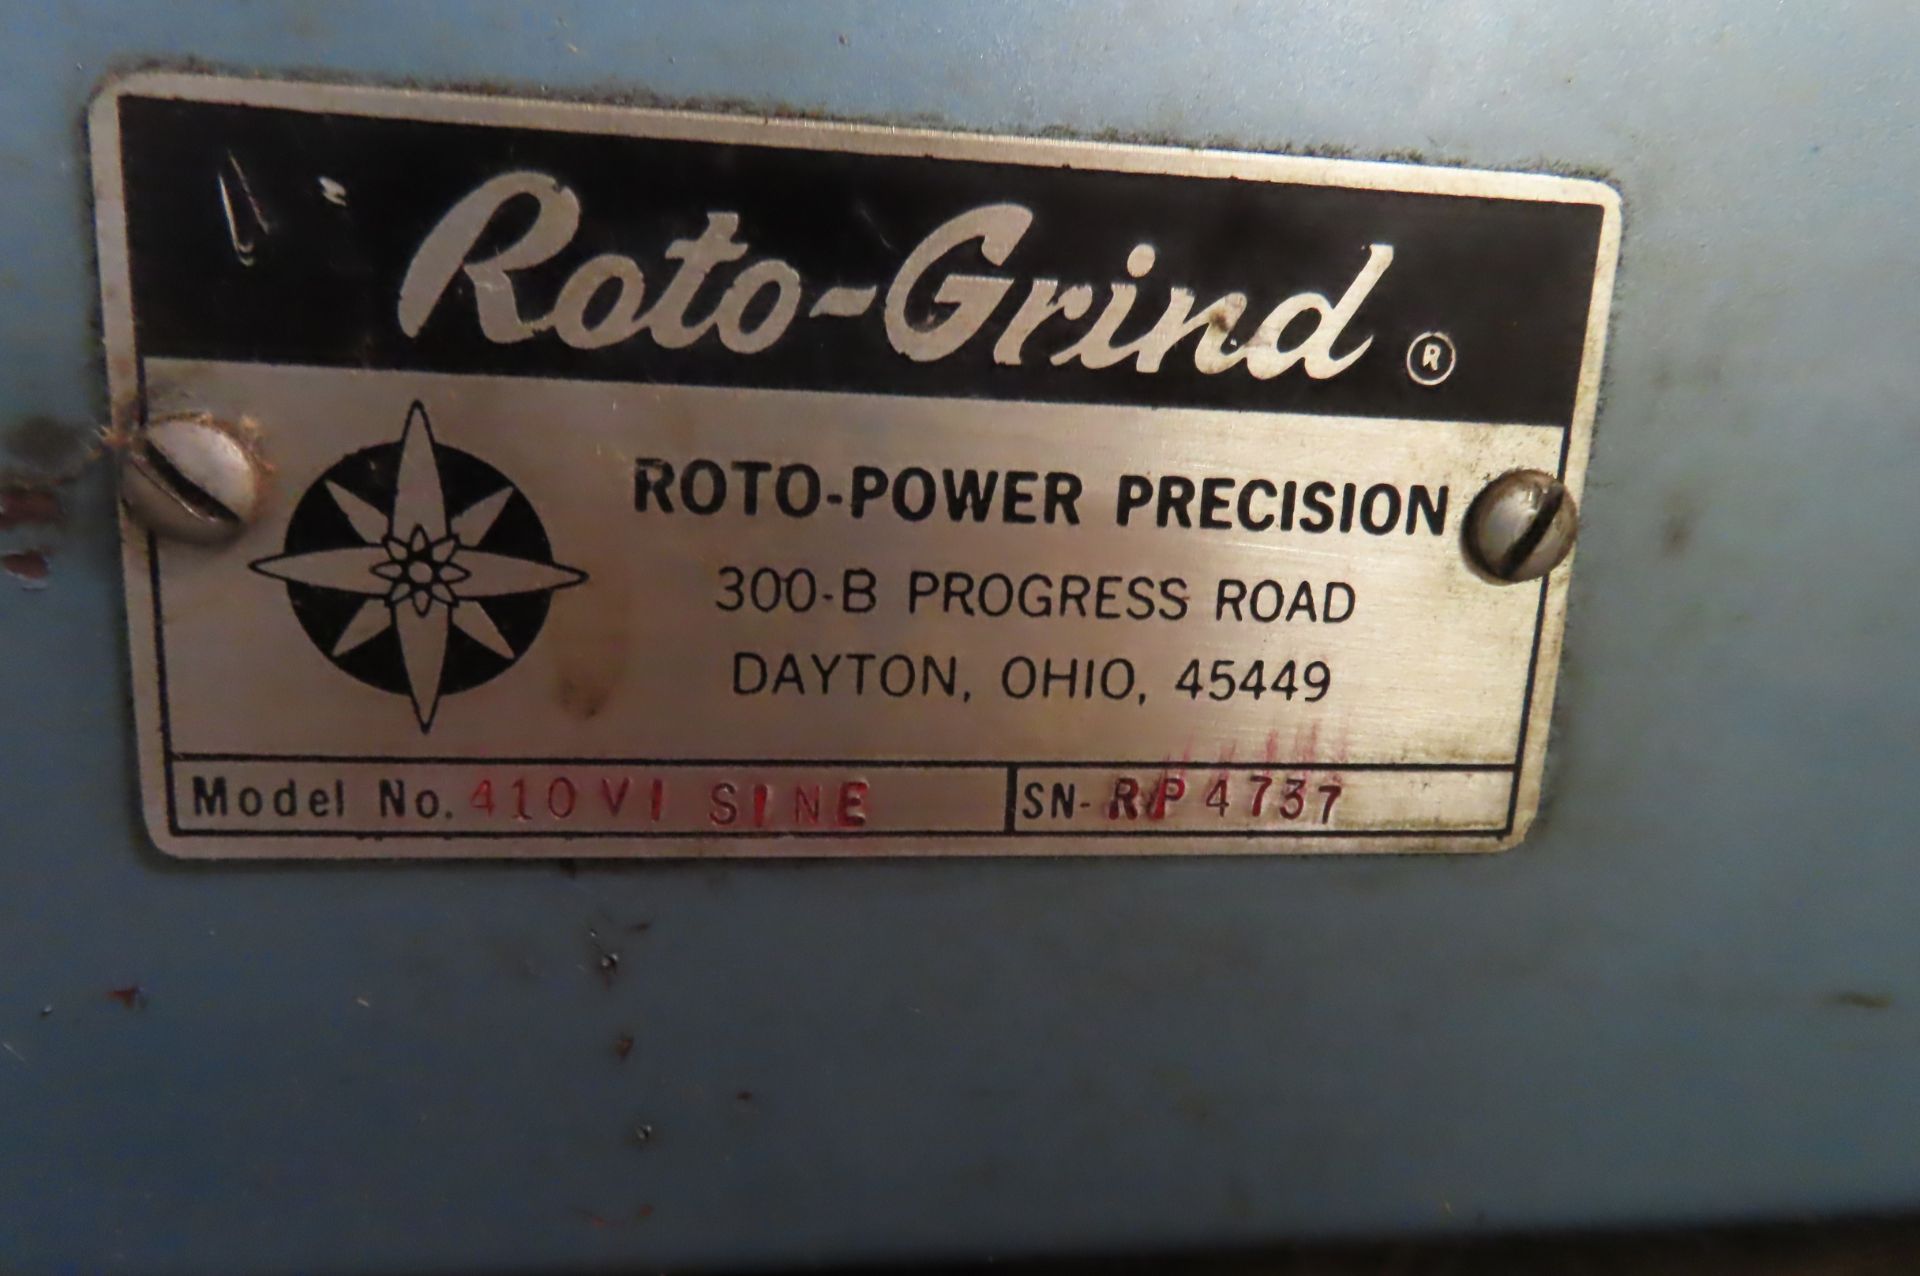 ROTO-GRIND 10 IN. ROTARY TABLE WITH 410V1 SINE CONTROL WITH V.S. DRIVE (MISSING SINE PLATE) - Image 3 of 3